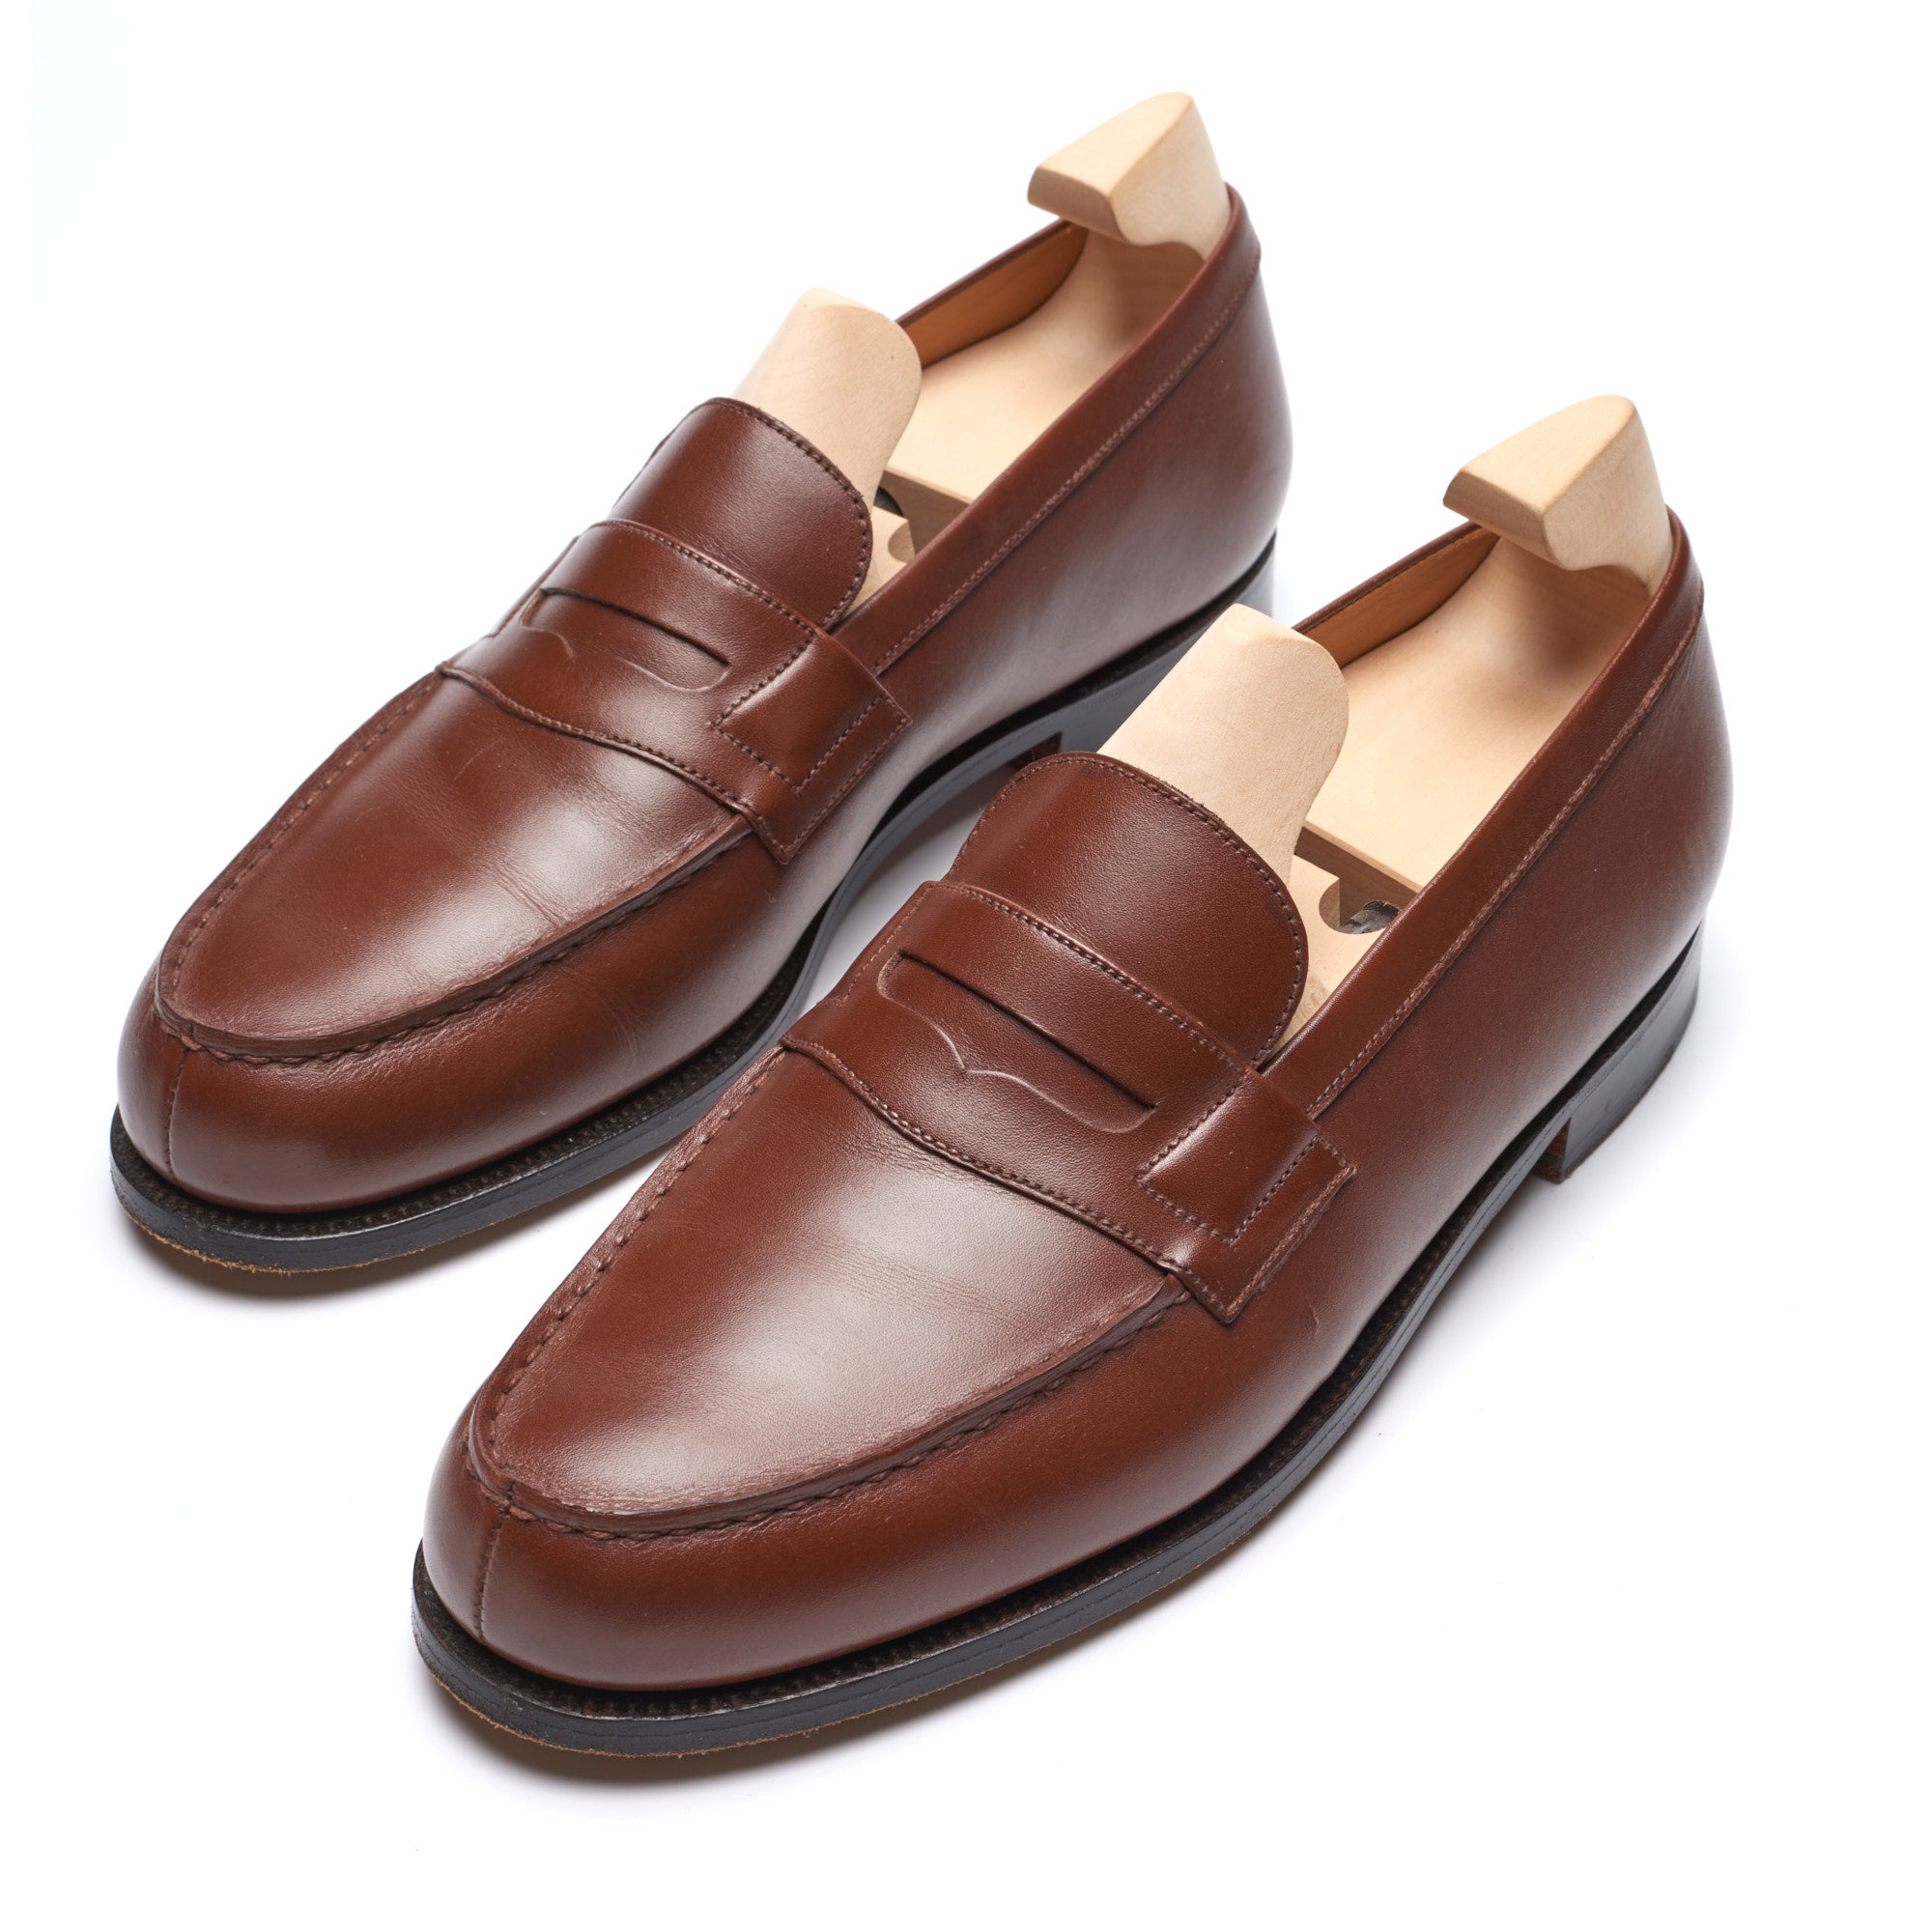 J.M. WESTON 180 Loafer Brown Box Calf Leather Moc Toe Penny Loafer Shoes 7.5C US 8.5 J.M. WESTON